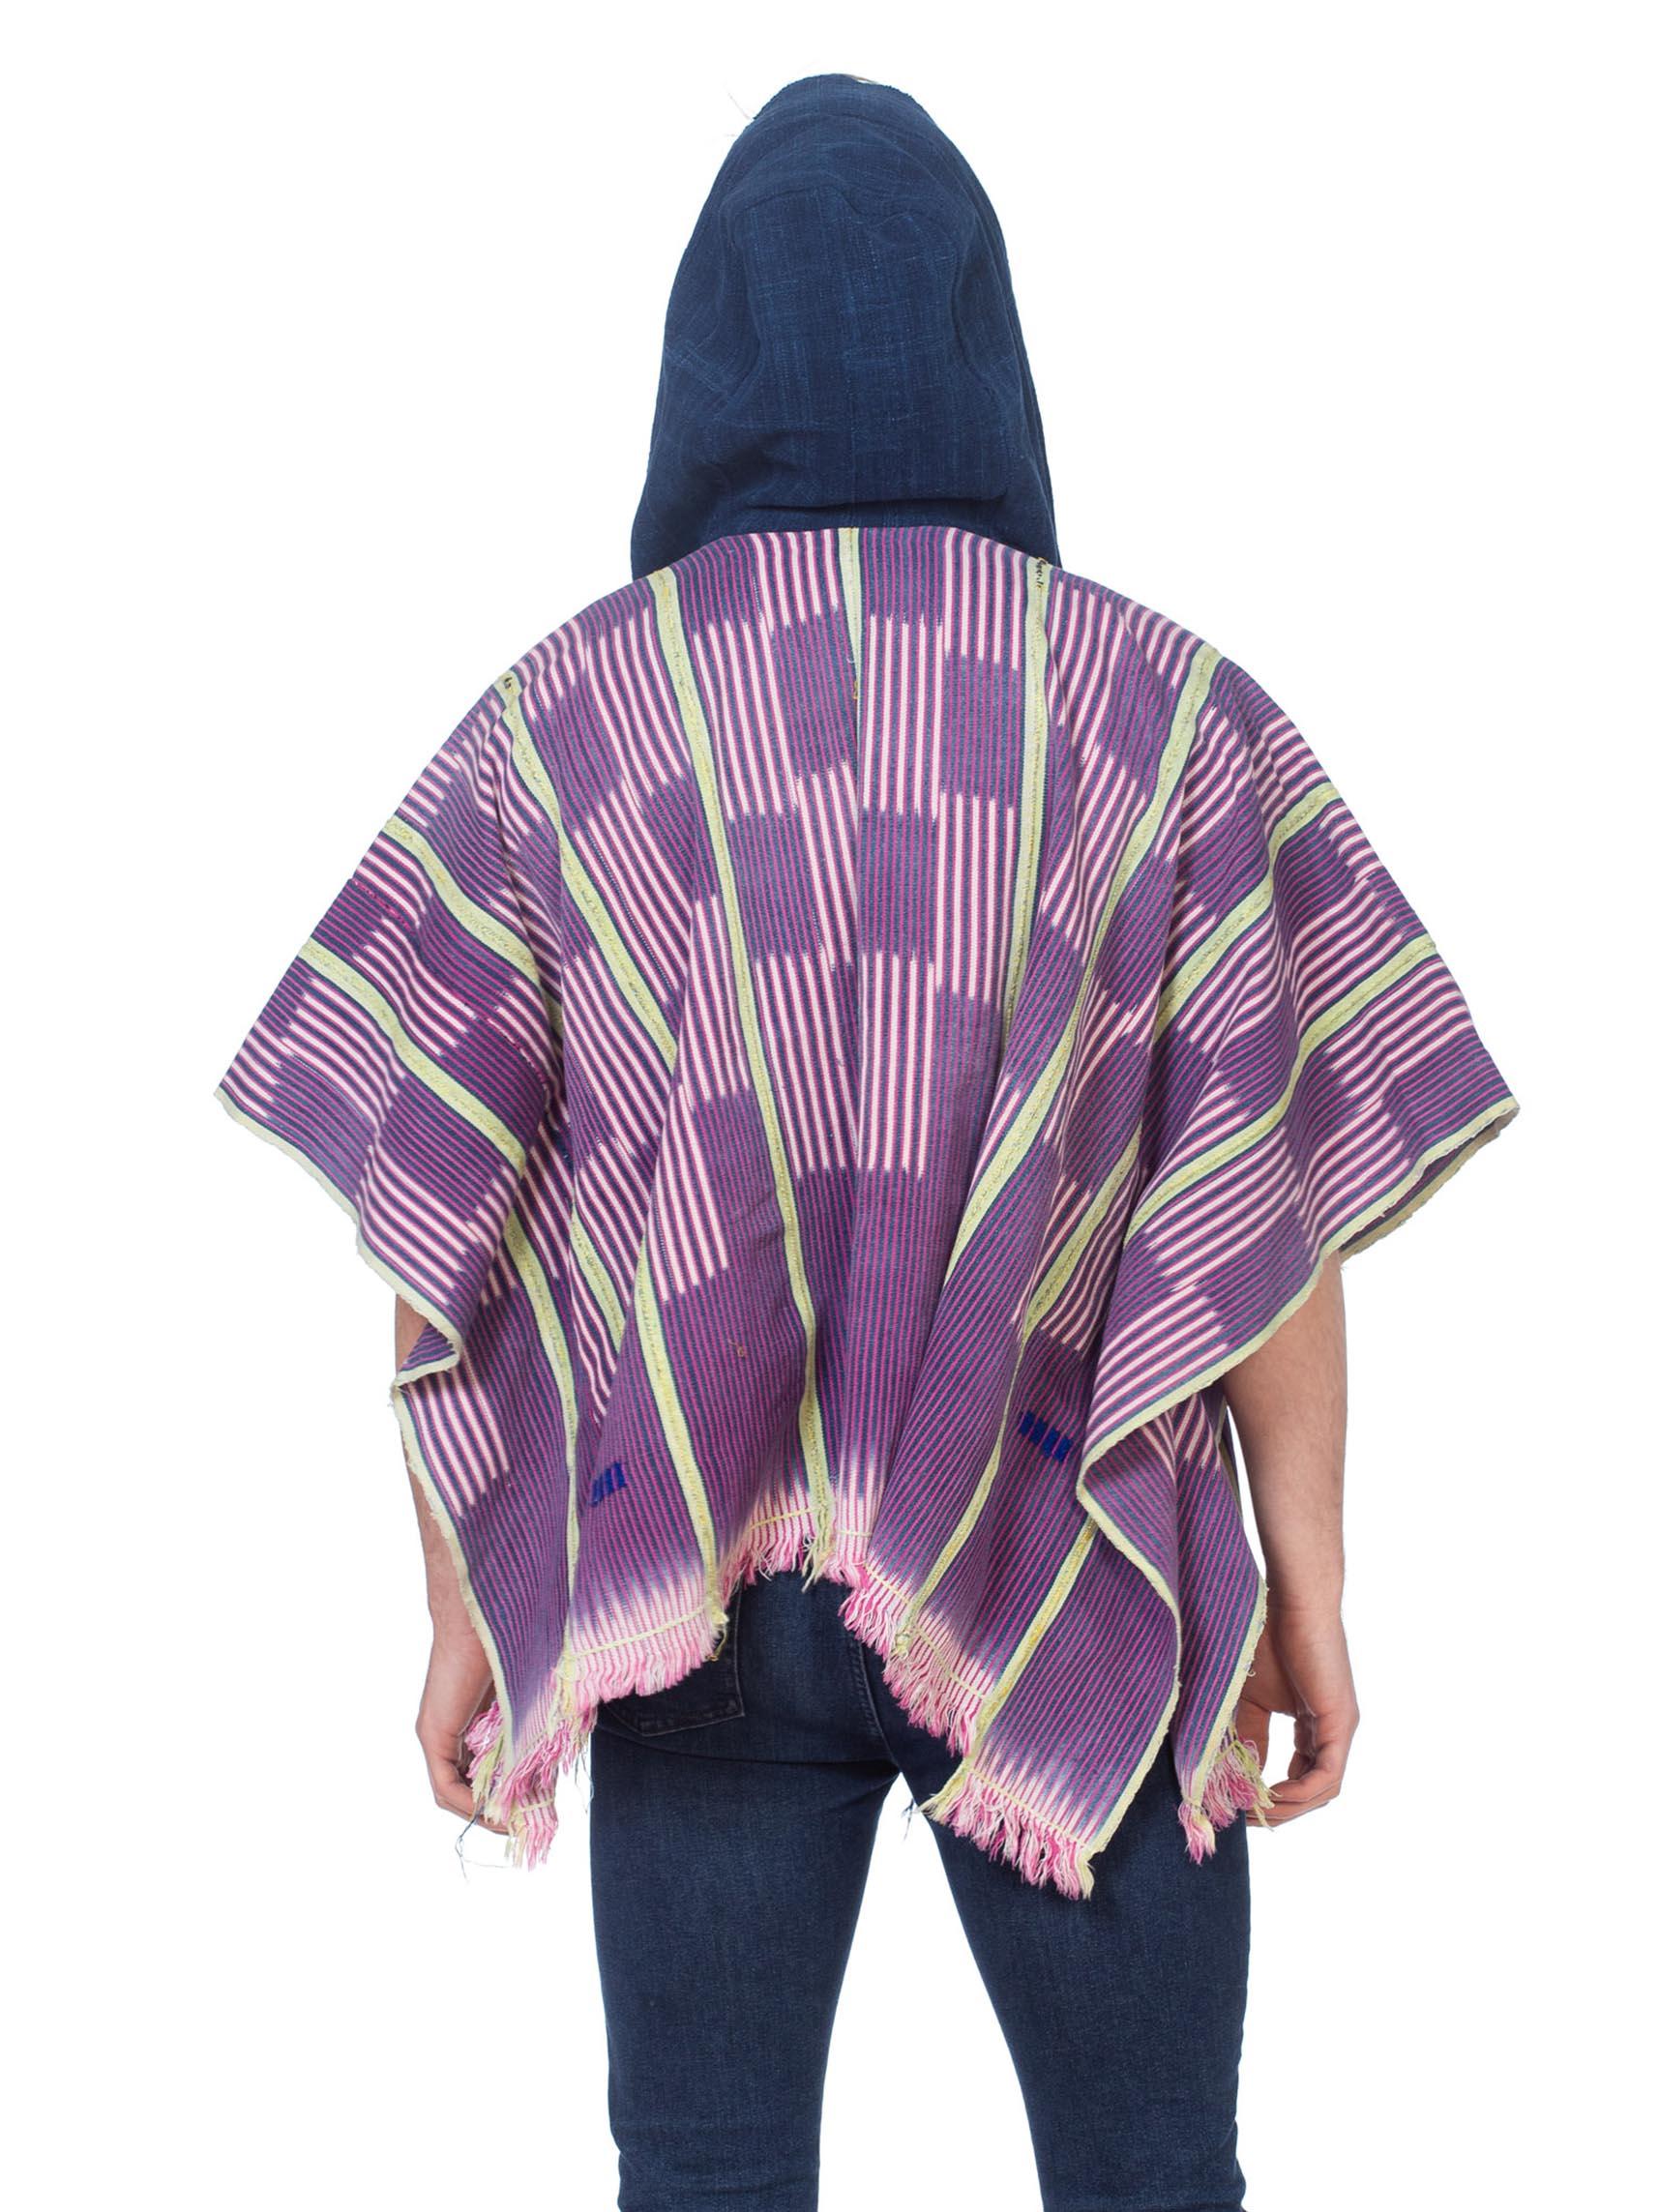 MORPHEW COLLECTION Pink & Blue Indigo Cotton African Blanket Hooded Poncho In Excellent Condition For Sale In New York, NY